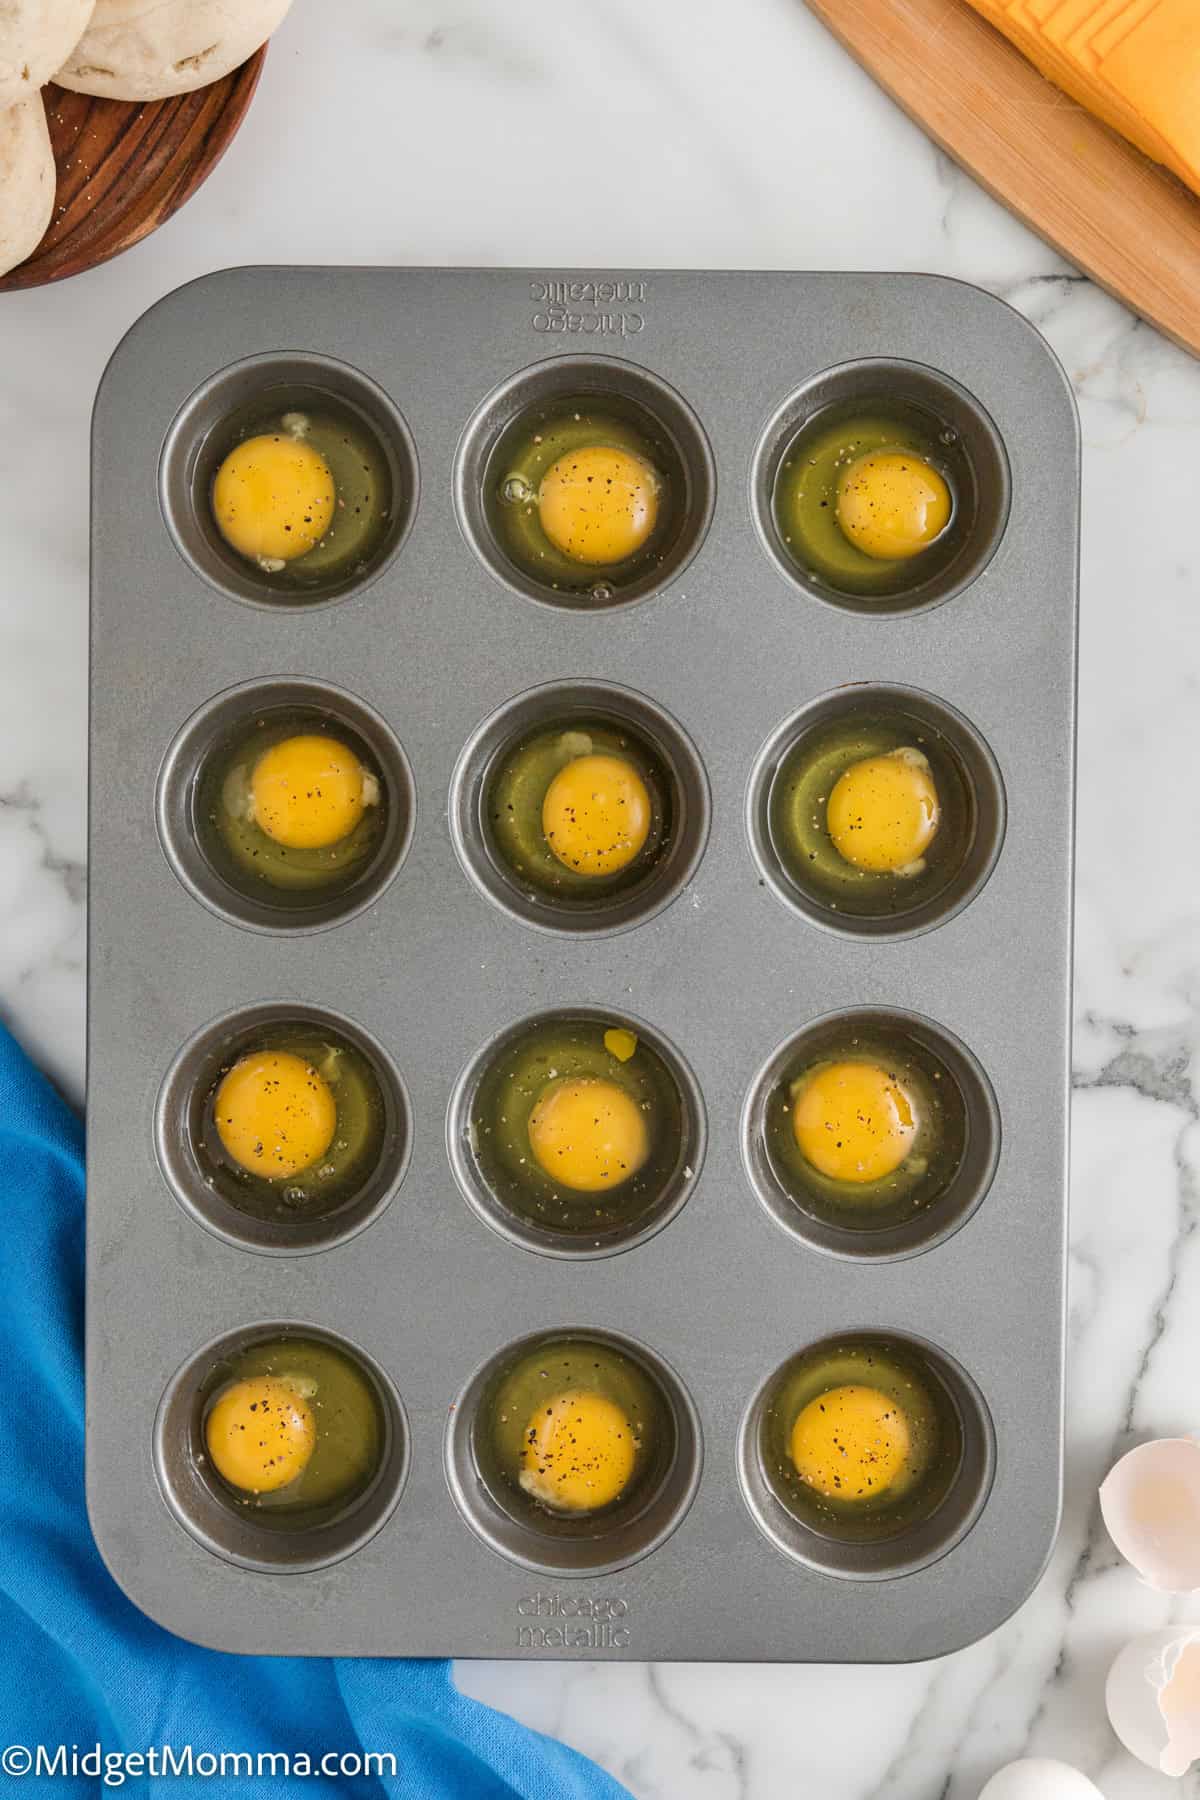 A muffin tin with twelve compartments, each containing a raw egg, is on a marble countertop. A blue cloth and some eggs are visible beside it.